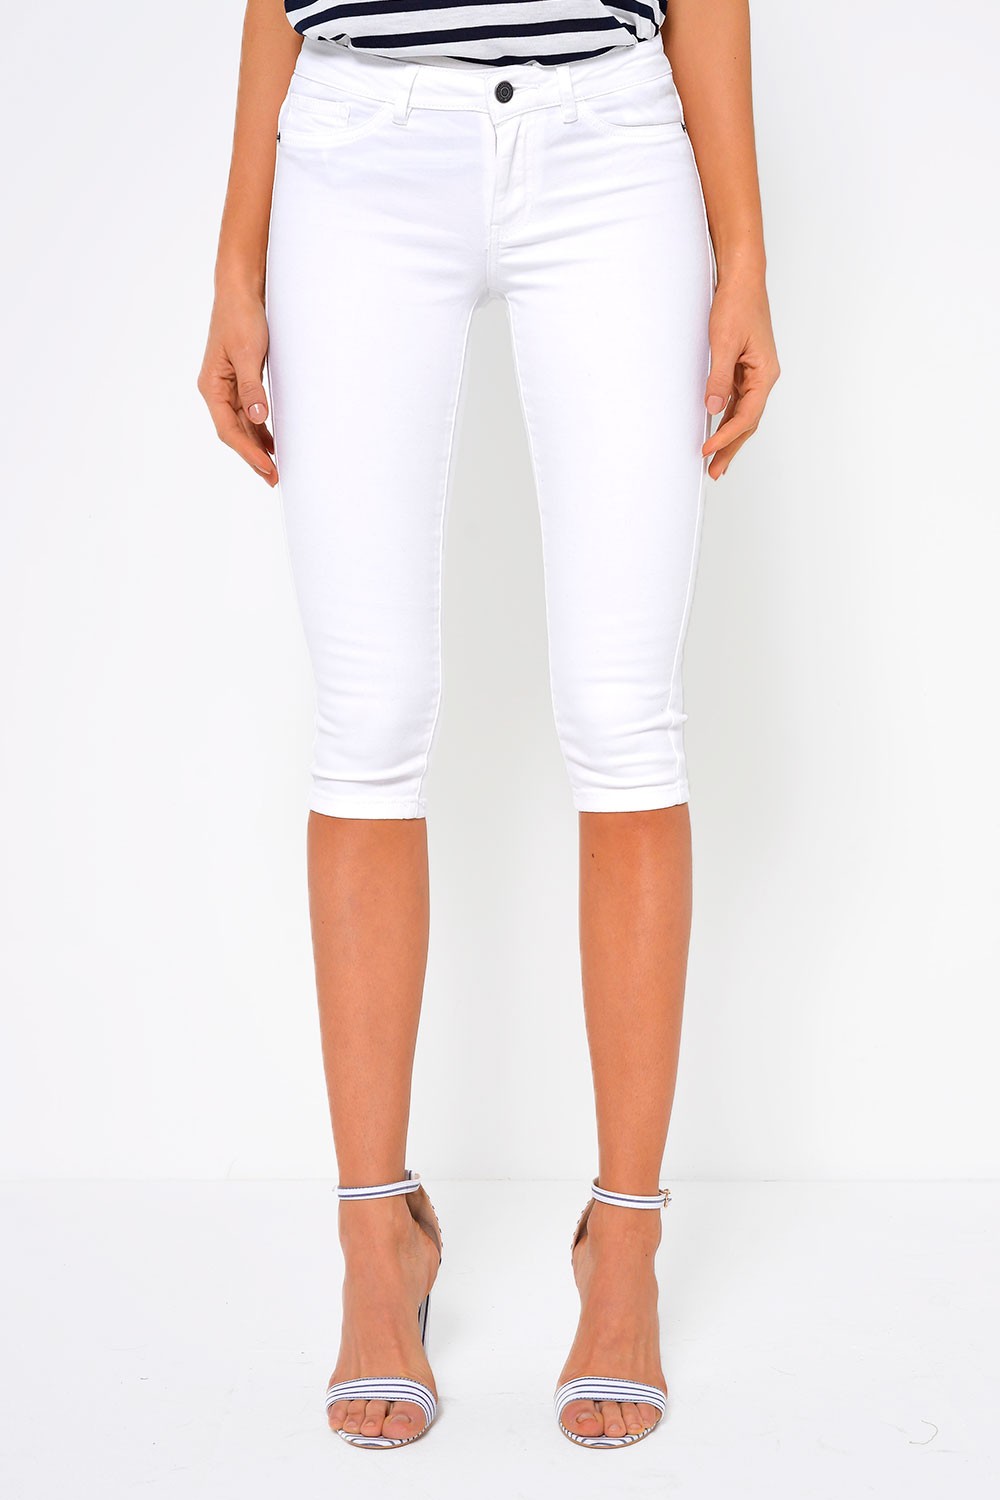 JDY Five Knee Length Shorts in White | iCLOTHING